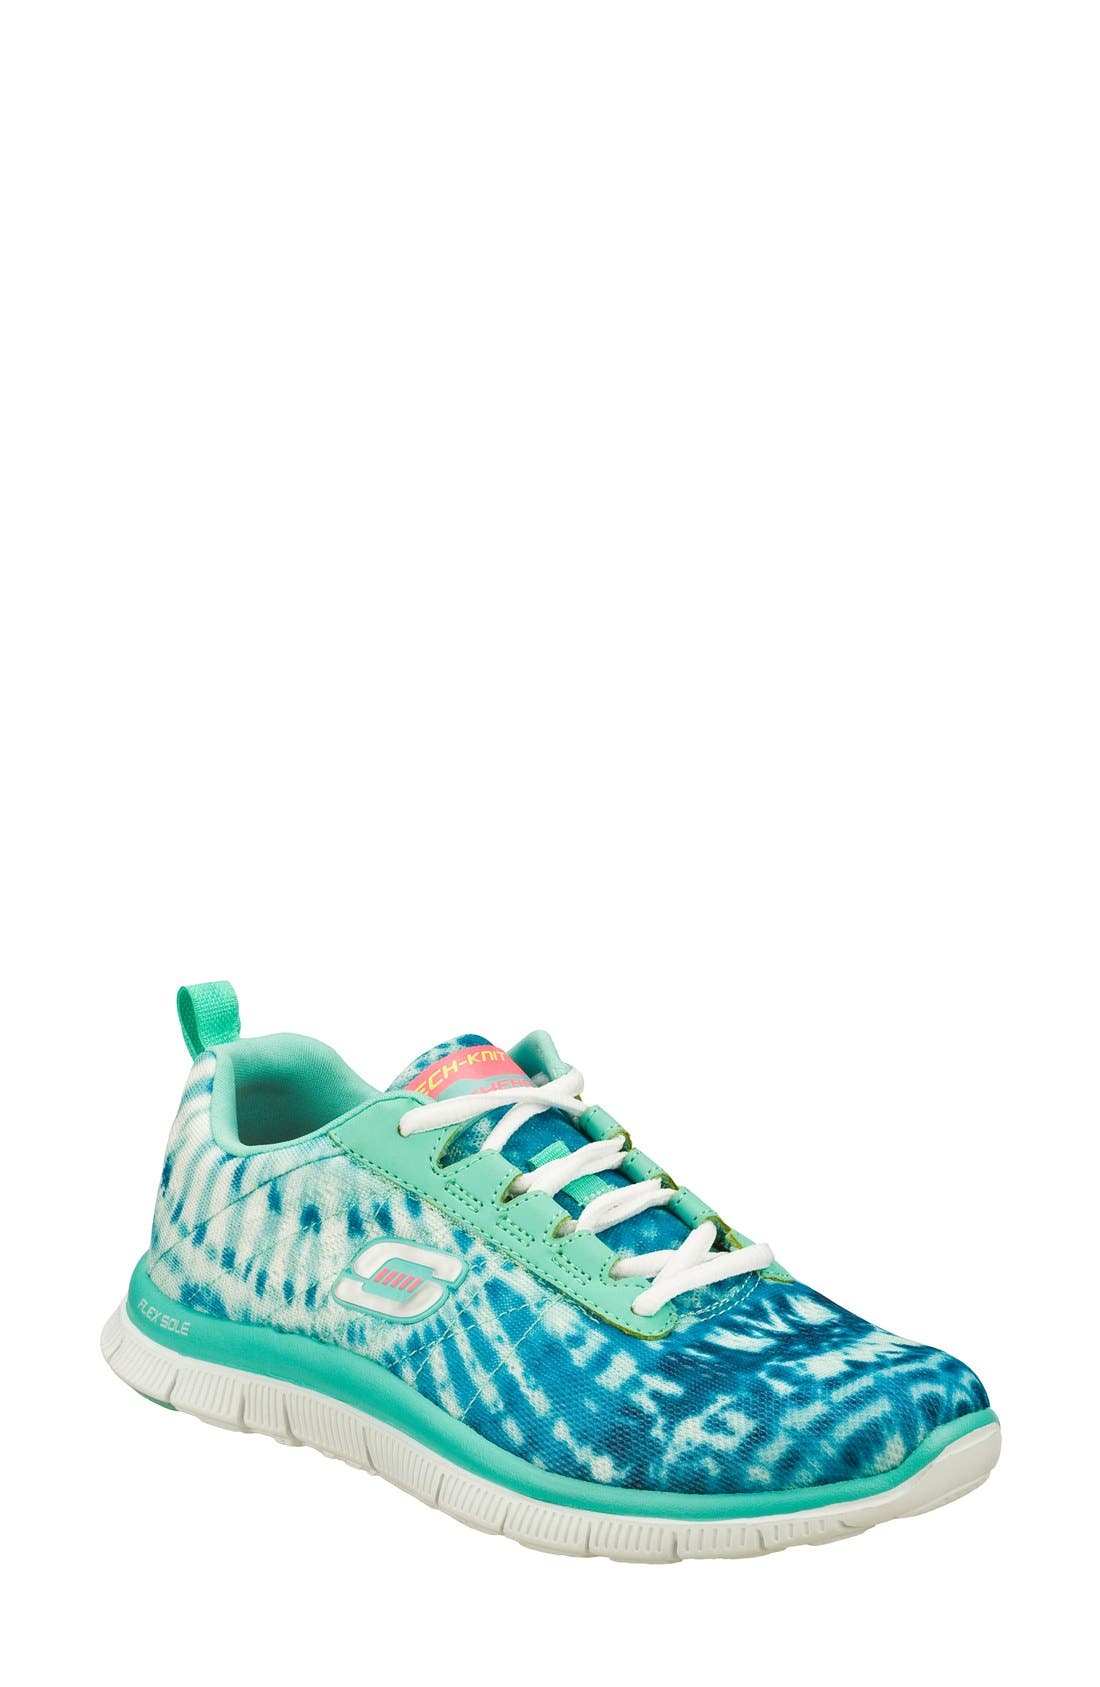 SKECHERS 'Flex Appeal - Limited Edition 